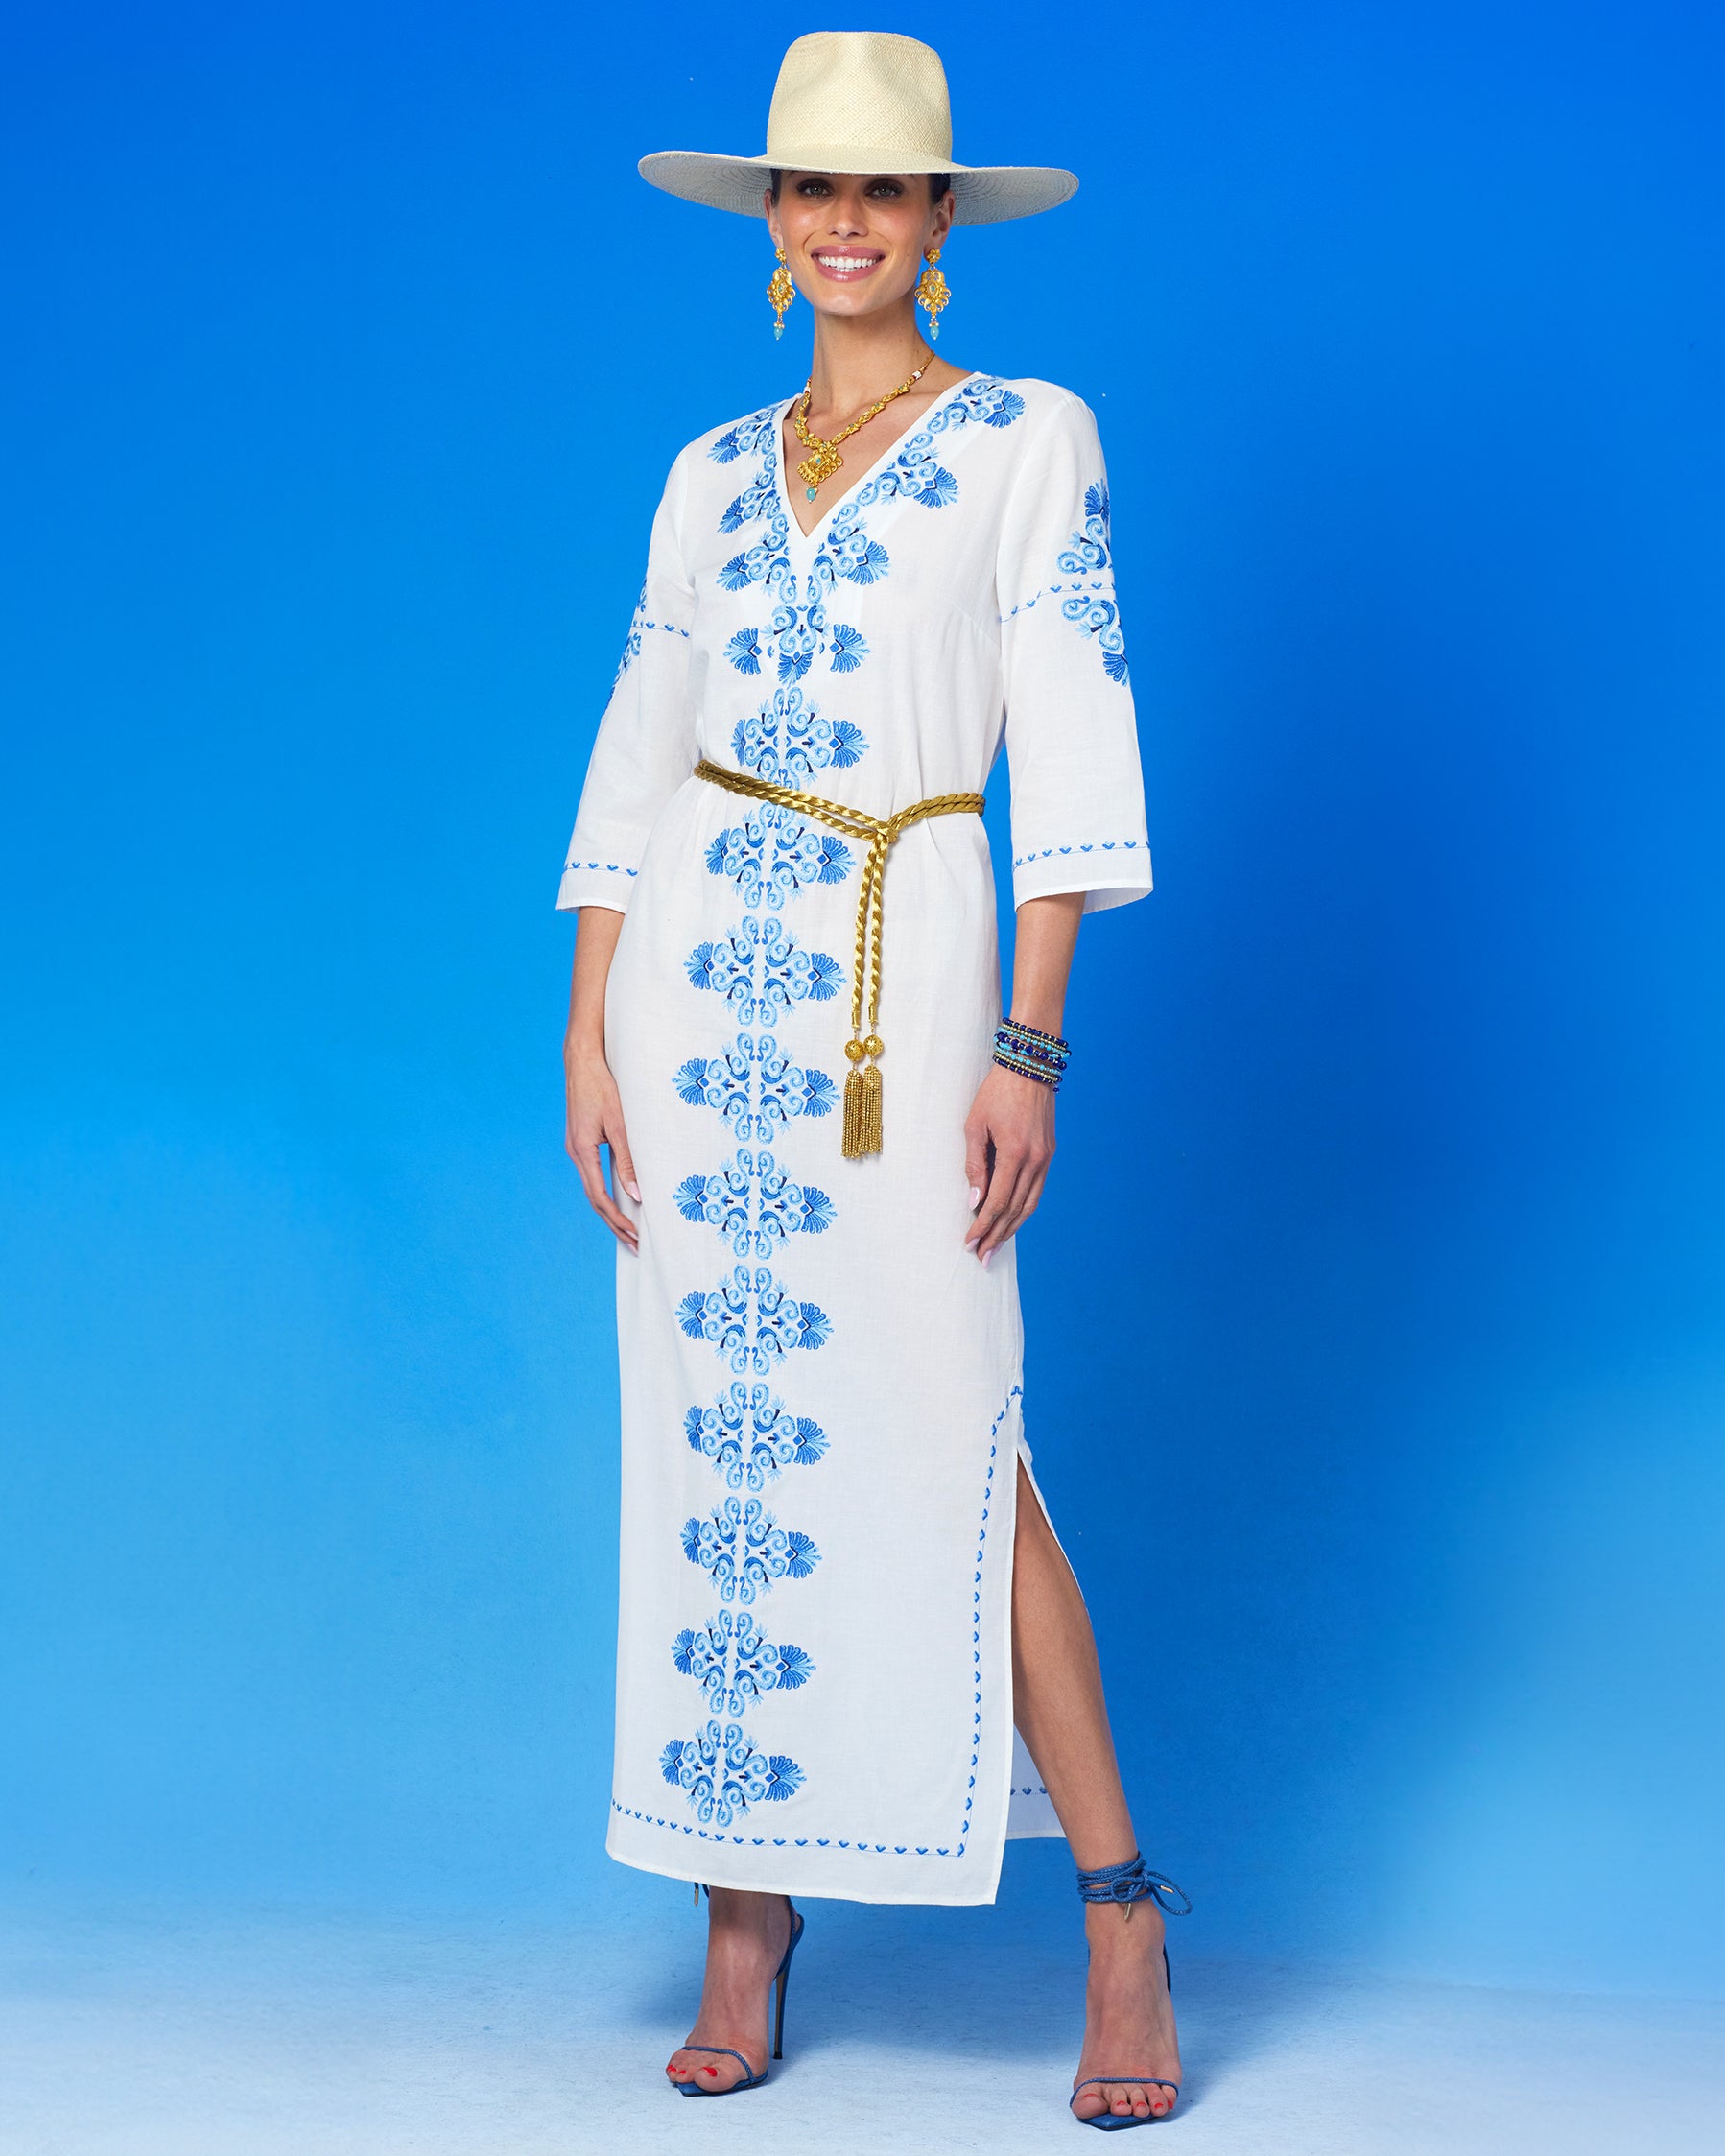 Menorca Long Kaftan Dress and Grecian Motif Embroidery-Front full view with the waist cinched with the Artemis Gold Rope Belt